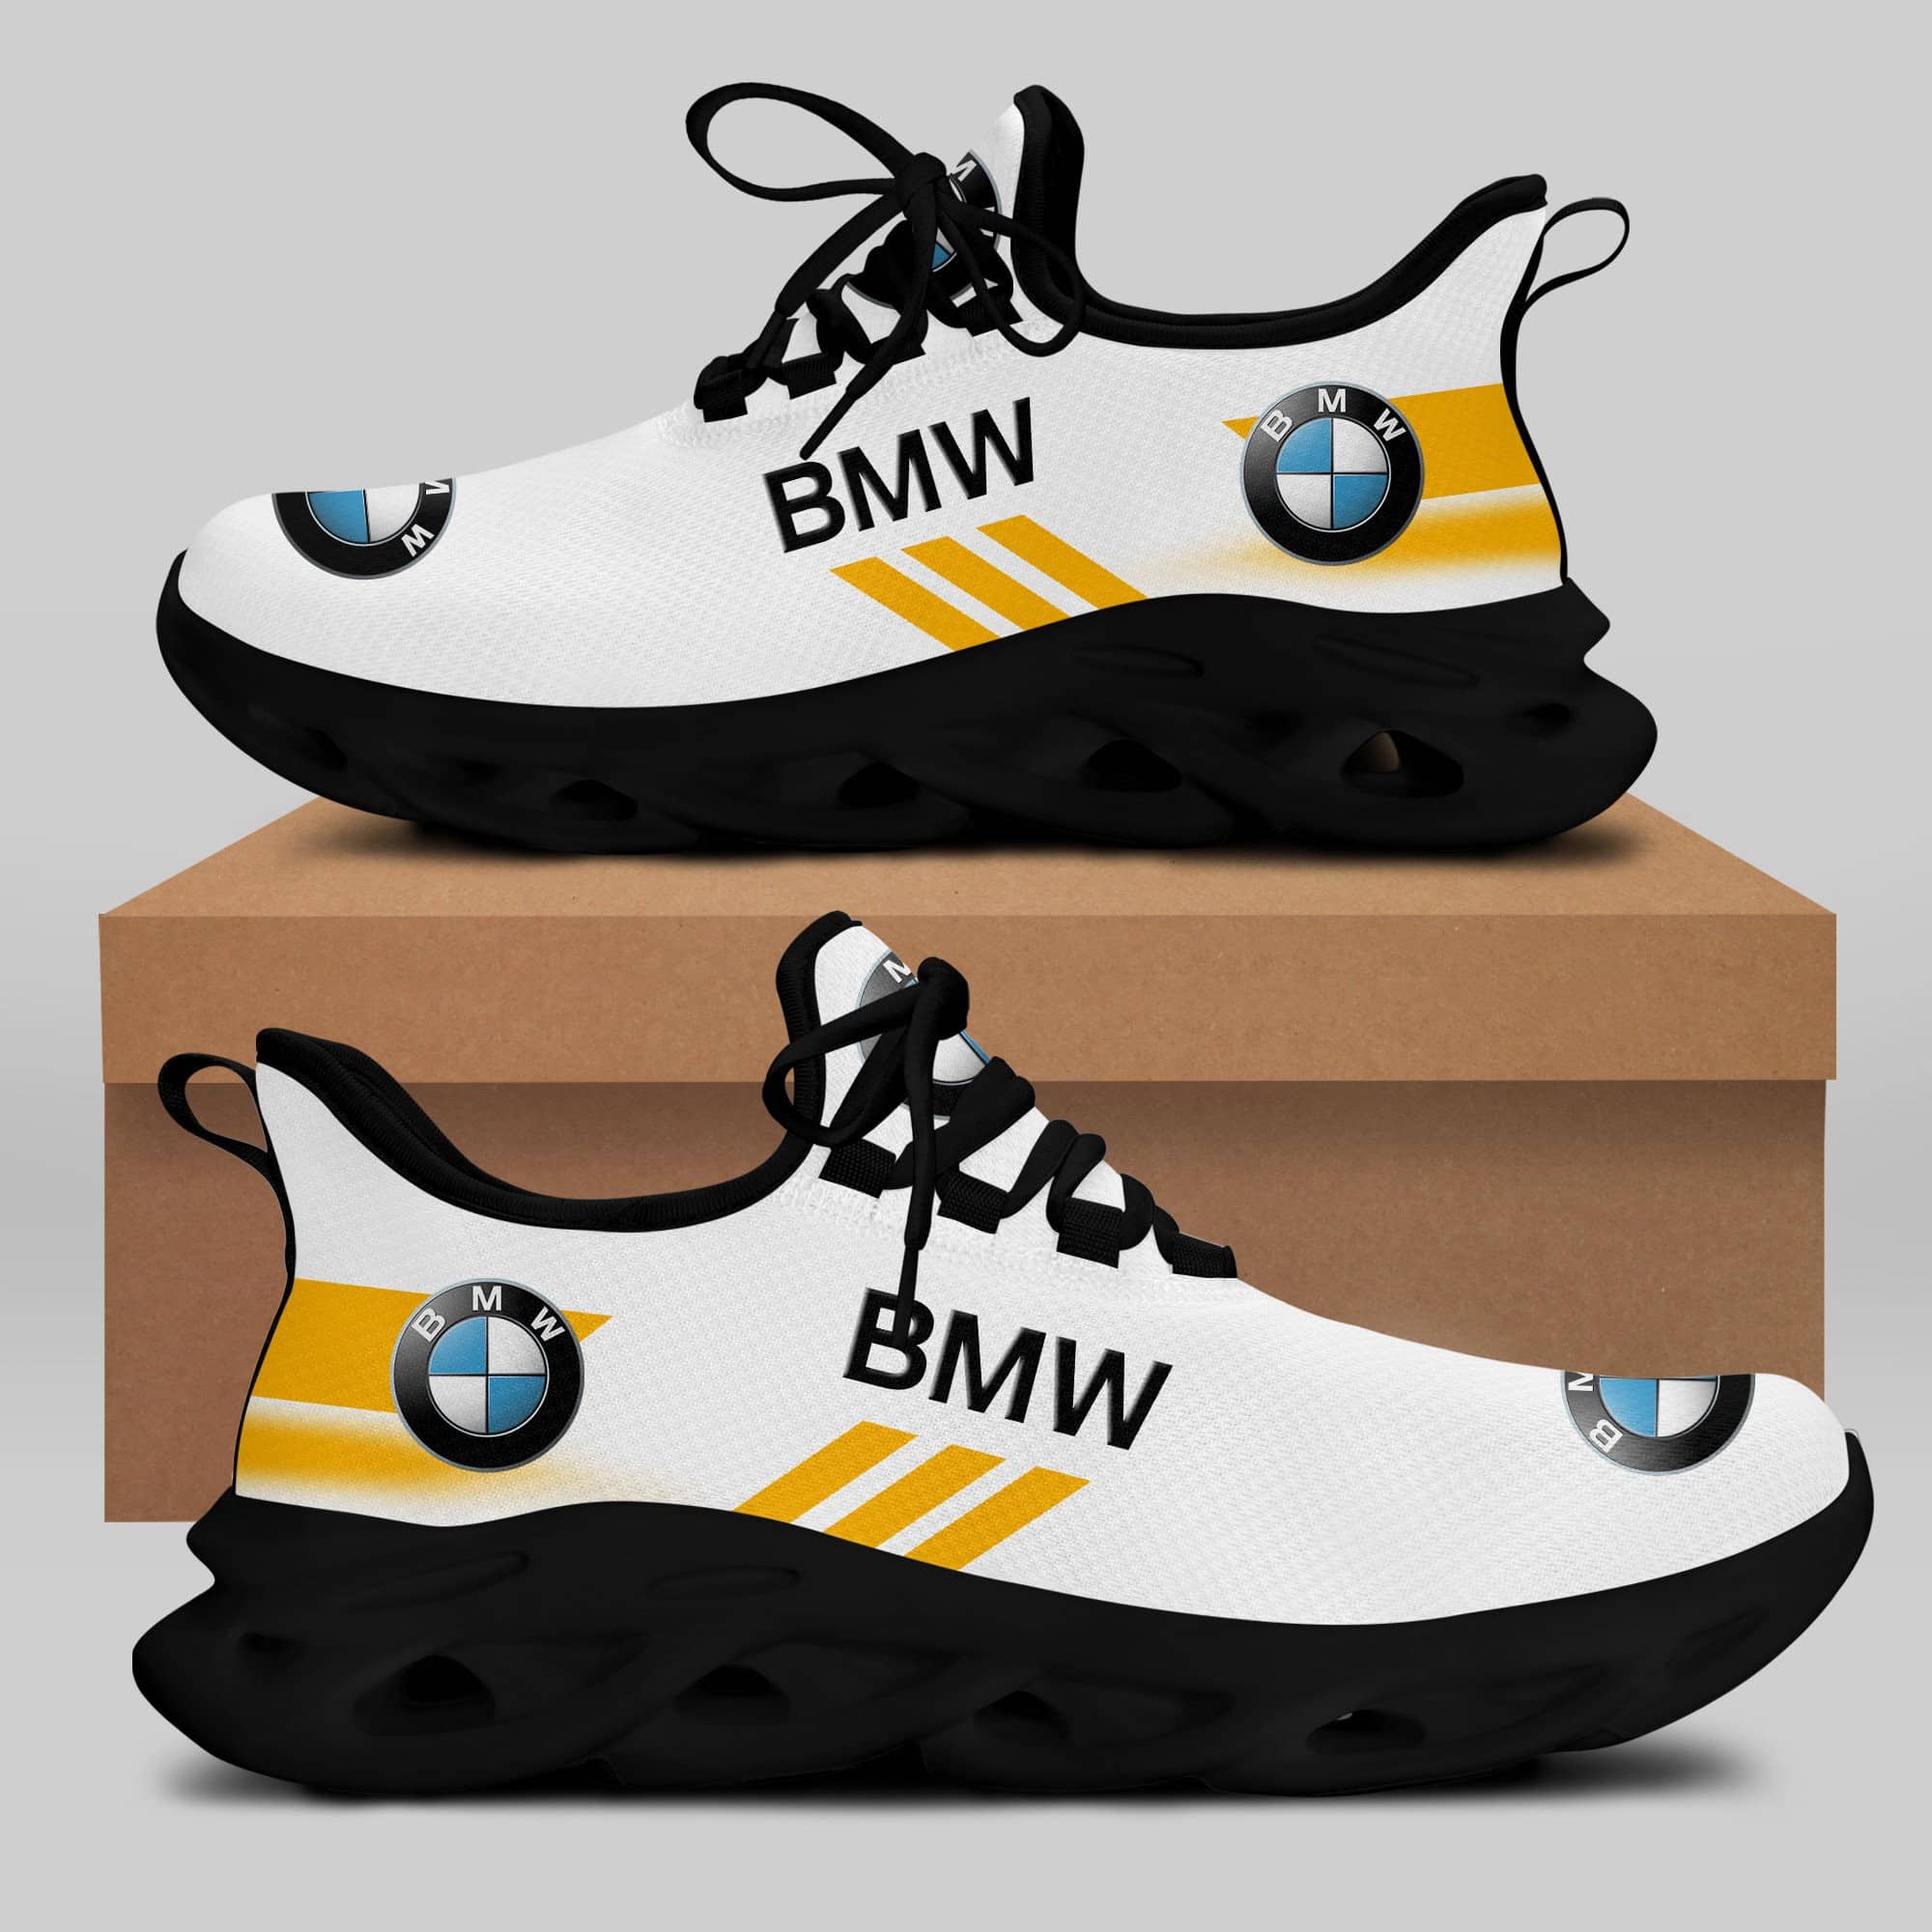 Bmw Running Shoes Max Soul Shoes Sneakers Ver 15 2